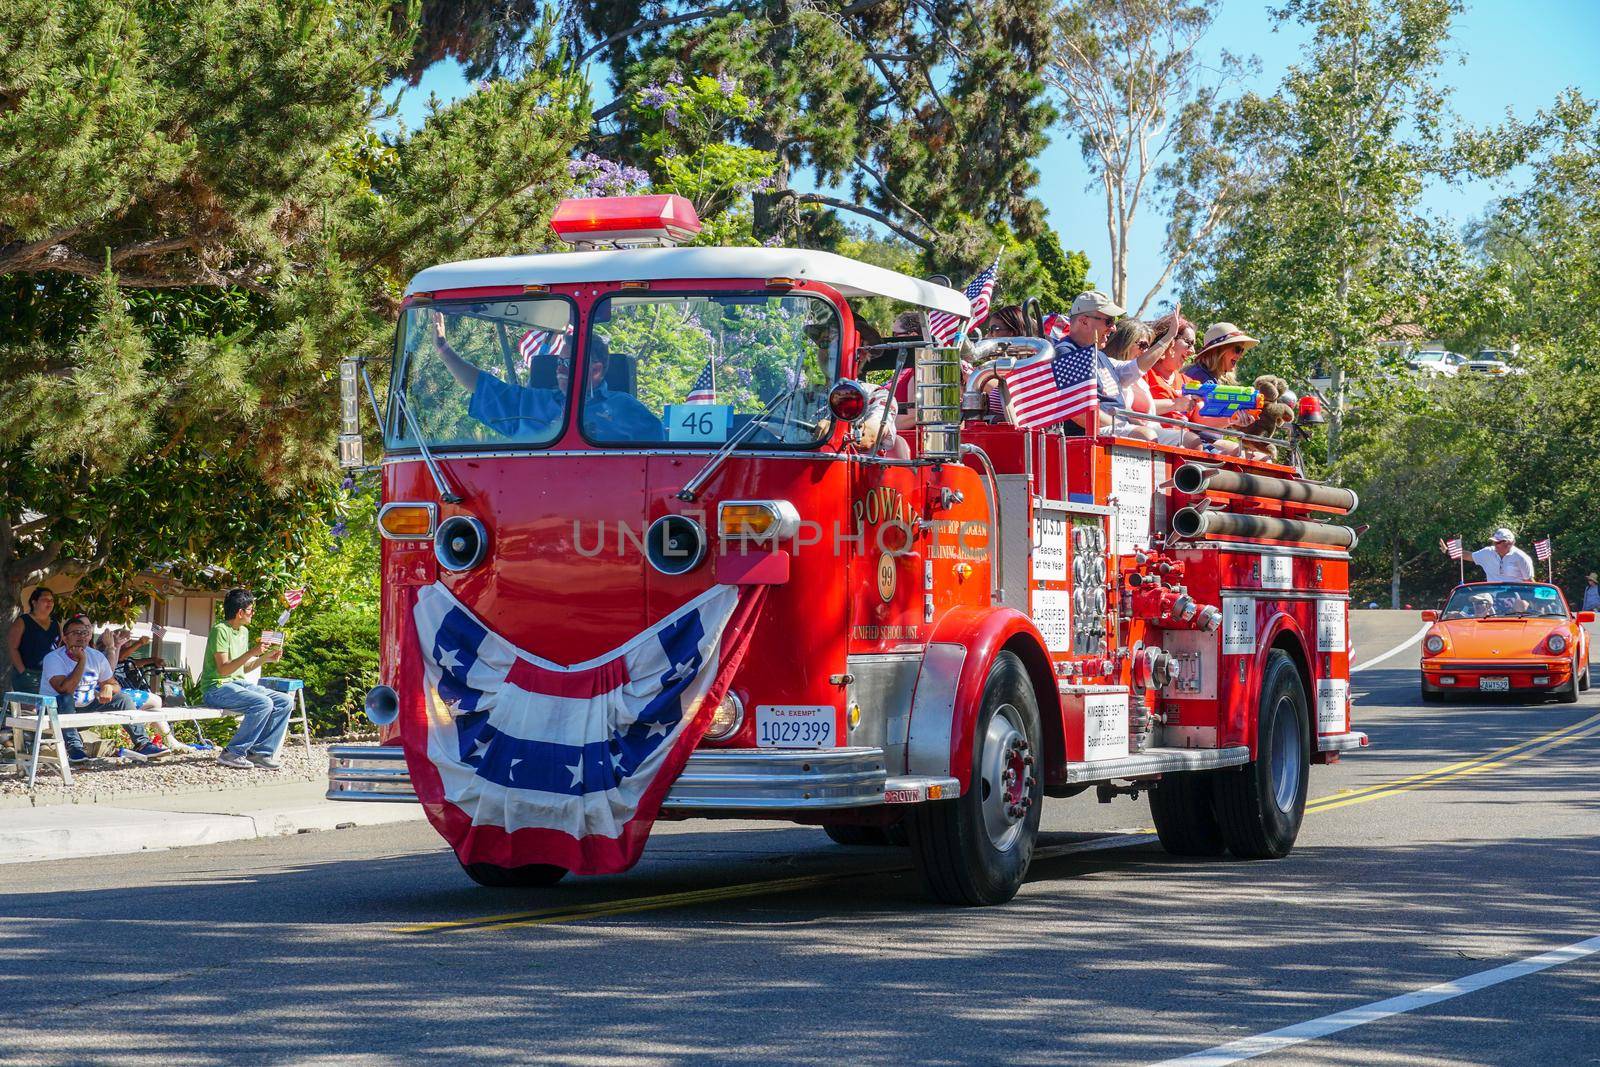 Old Firetruck and people at the July 4th Independence Day Parade in Rancho Bernardo, San Diego, California, USA. July 4th 2020